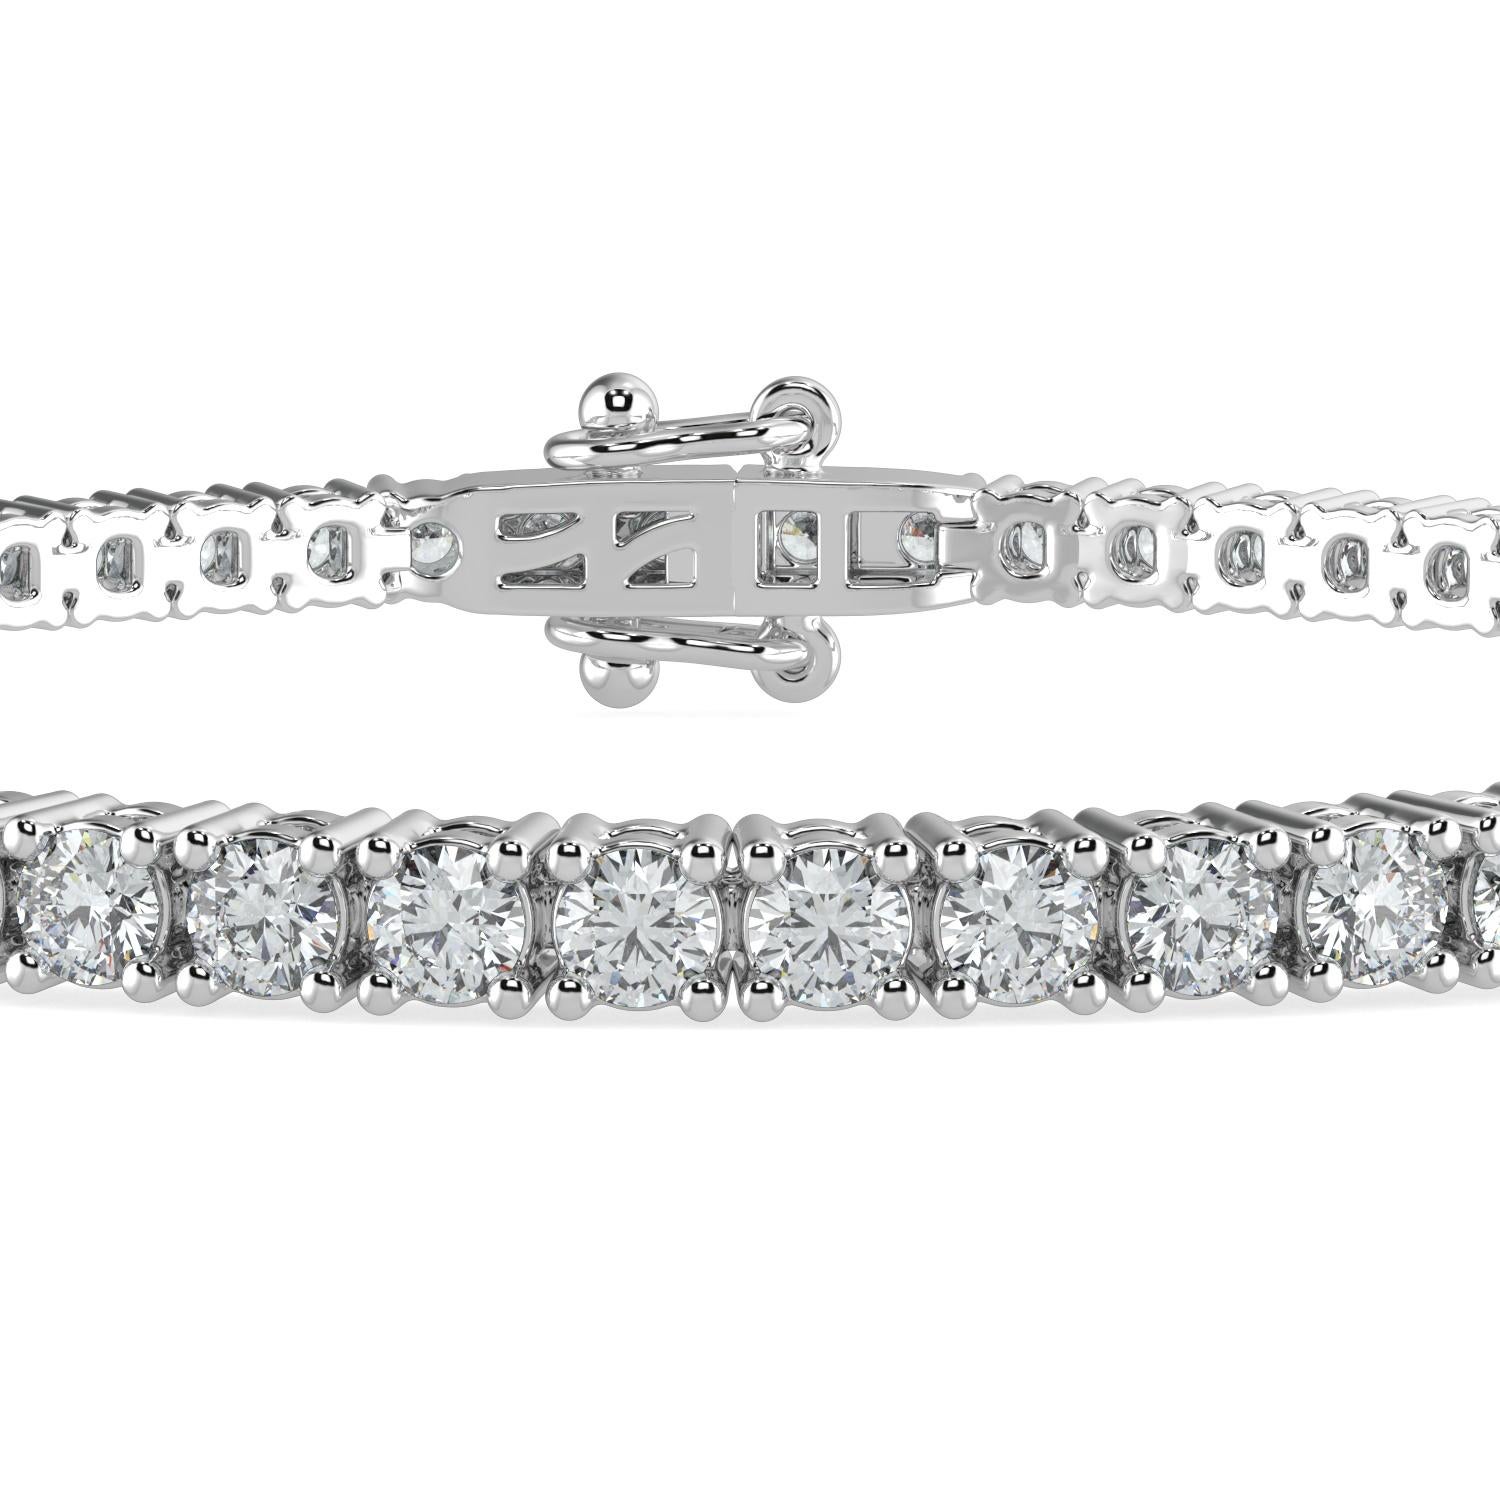 4.00 Carat Round Cut GH-SI Natural Diamond Classic Tennis Bracelet 4 Prong 14K White Gold for Women

Specification
Brand: AAMIAA
Length: 7 Inches 
Color: GH
Carat Weight:4CTW
Clarity: SI

LUXURIOUS AND LASTING- Our bracelets are a luxurious and